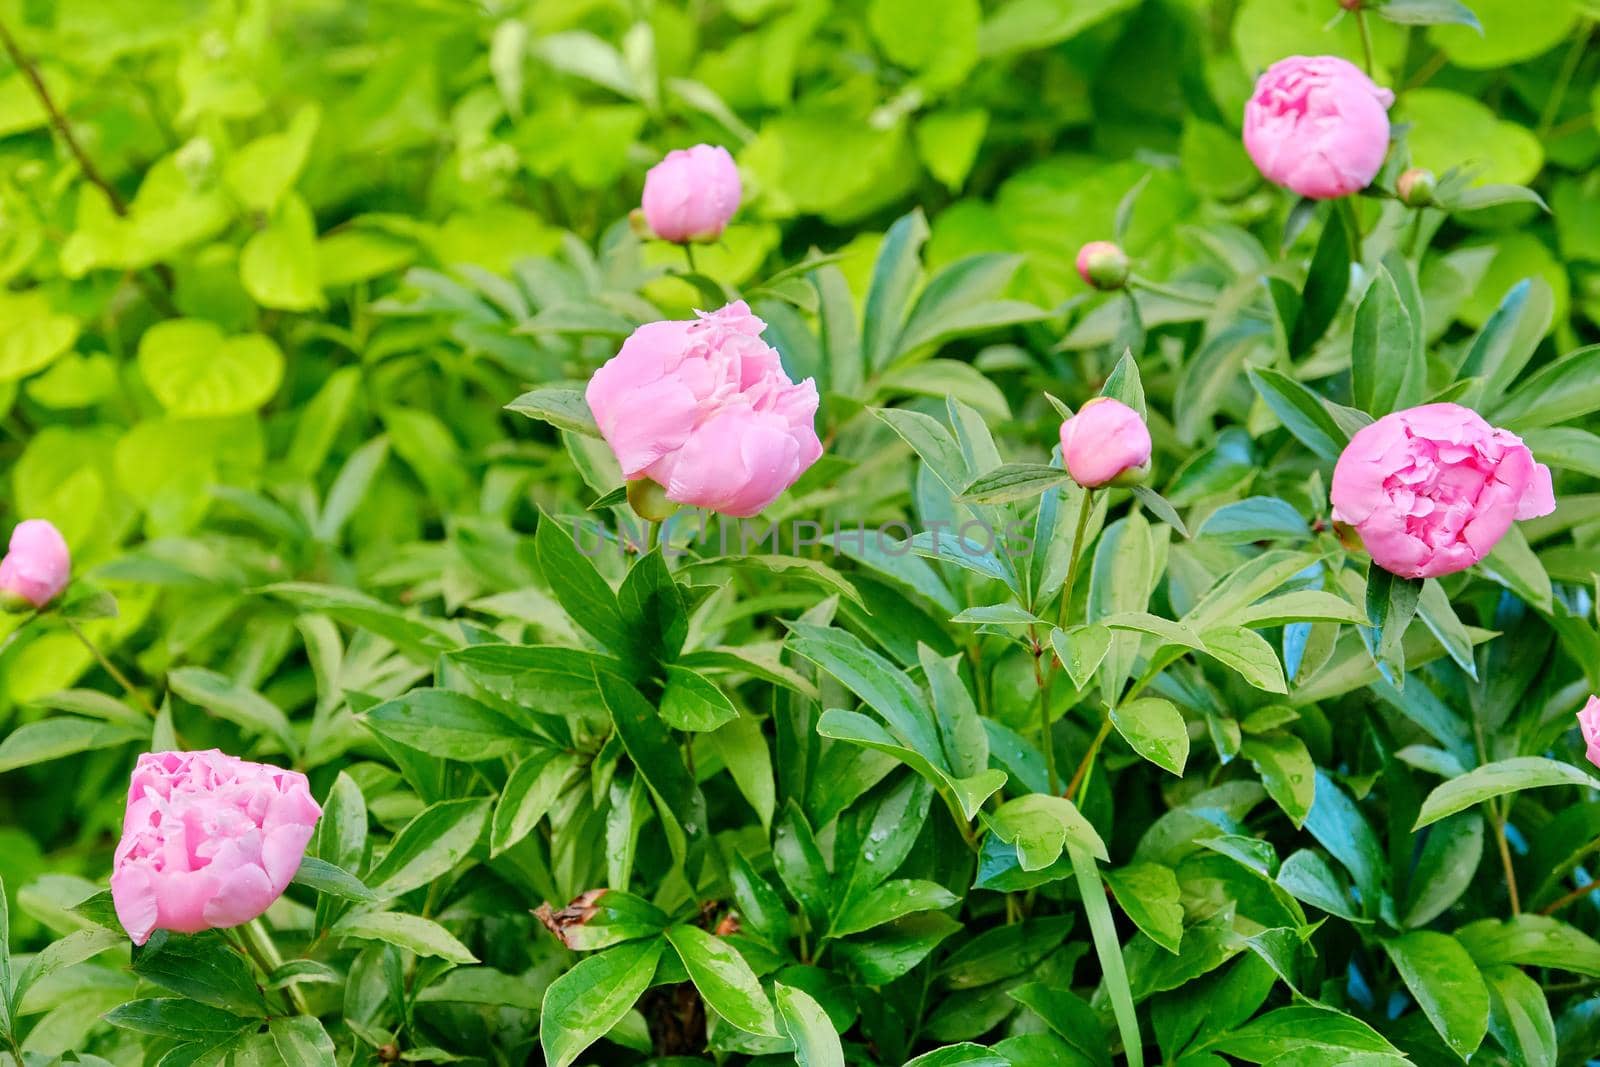 Blooming bush of pink peonies in the garden, many buds on a green bush with water drops, garden after spring rain, season, botany